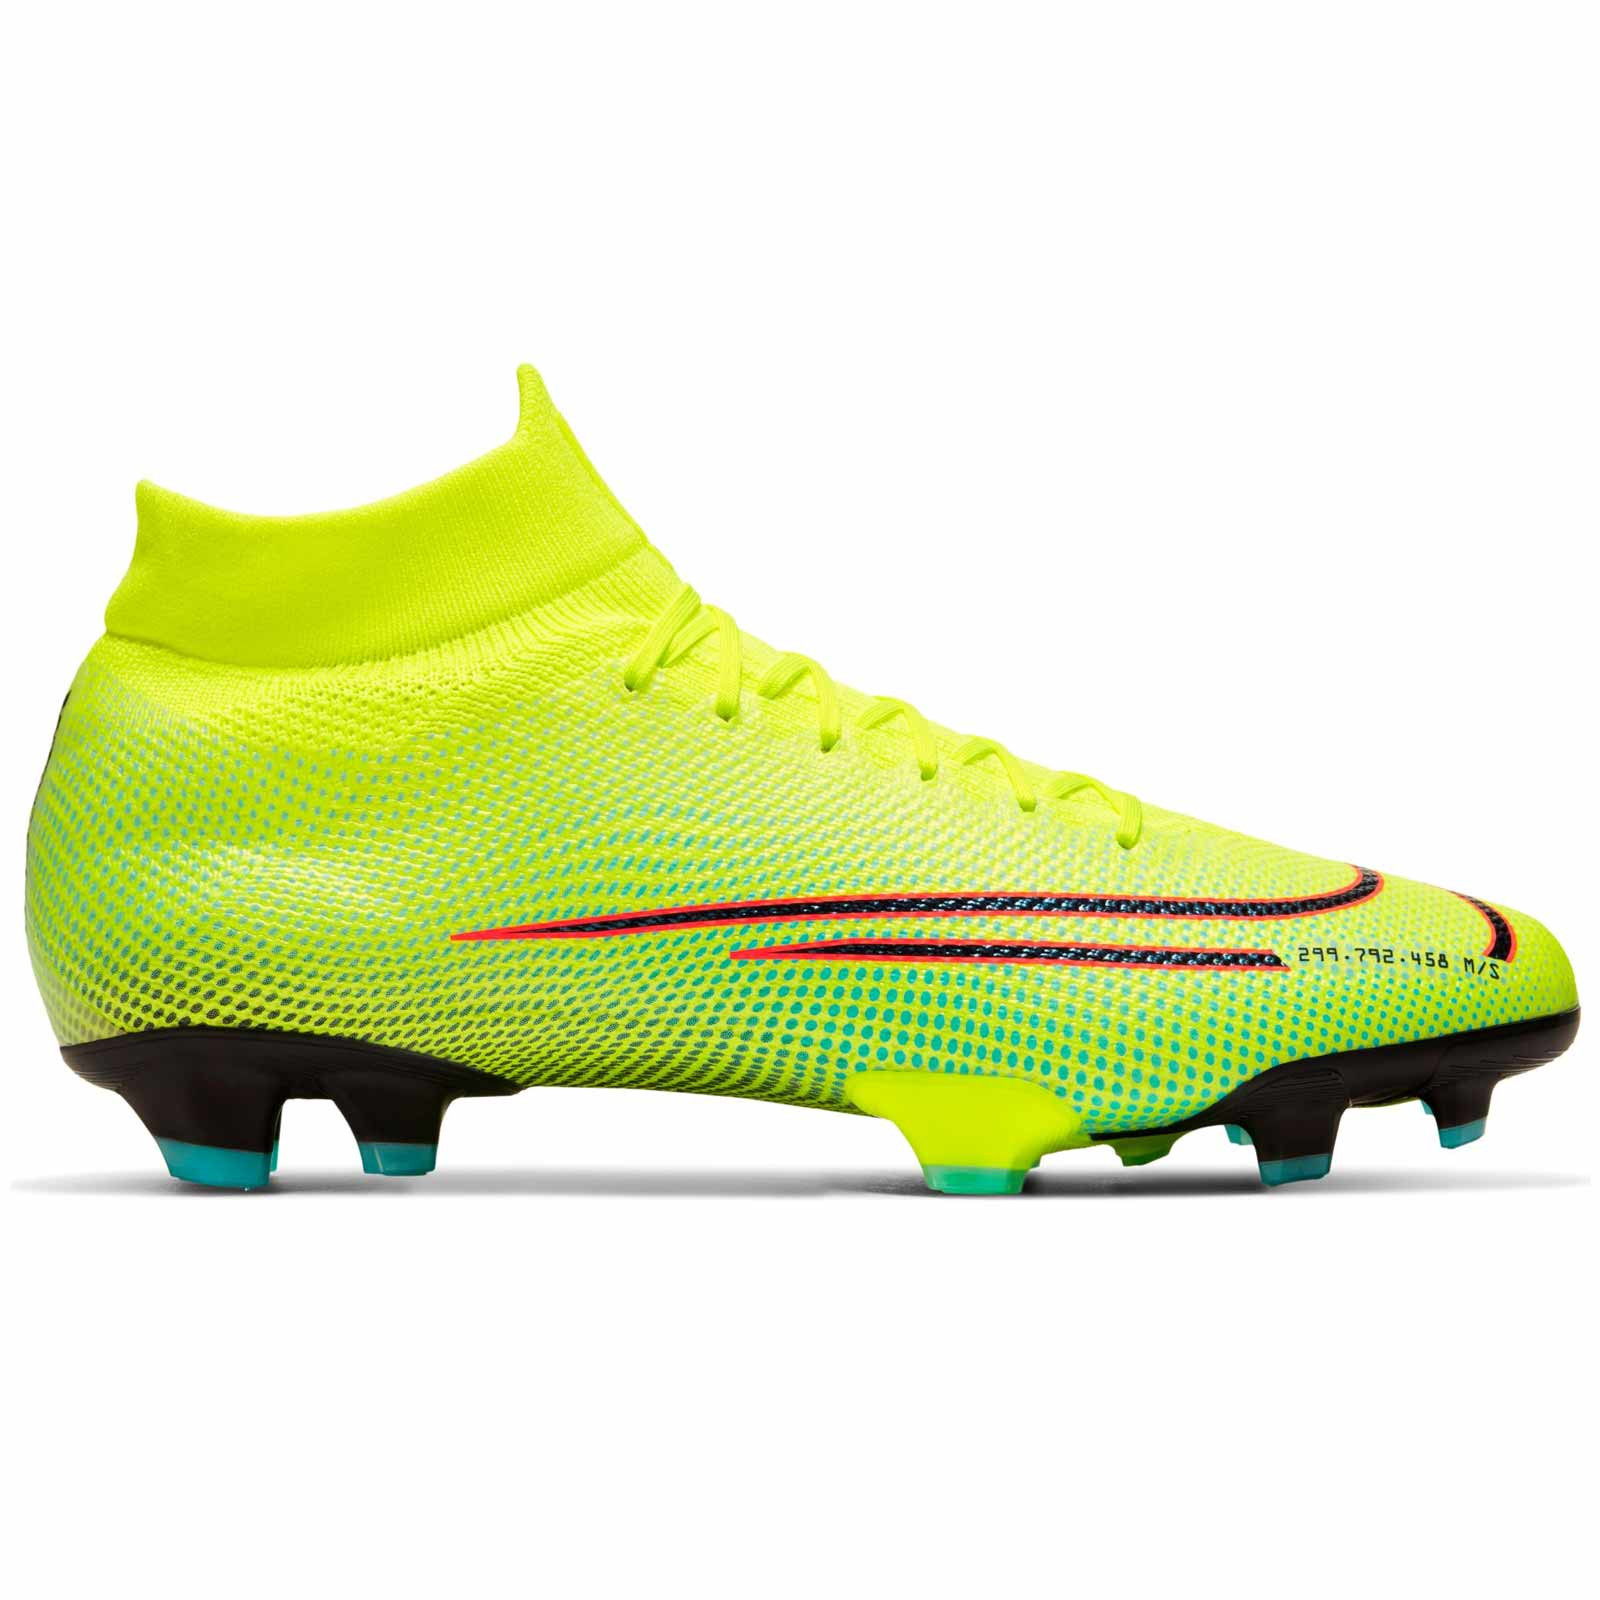 Mercurial Superfly 7 Pro MDS 2 FG |